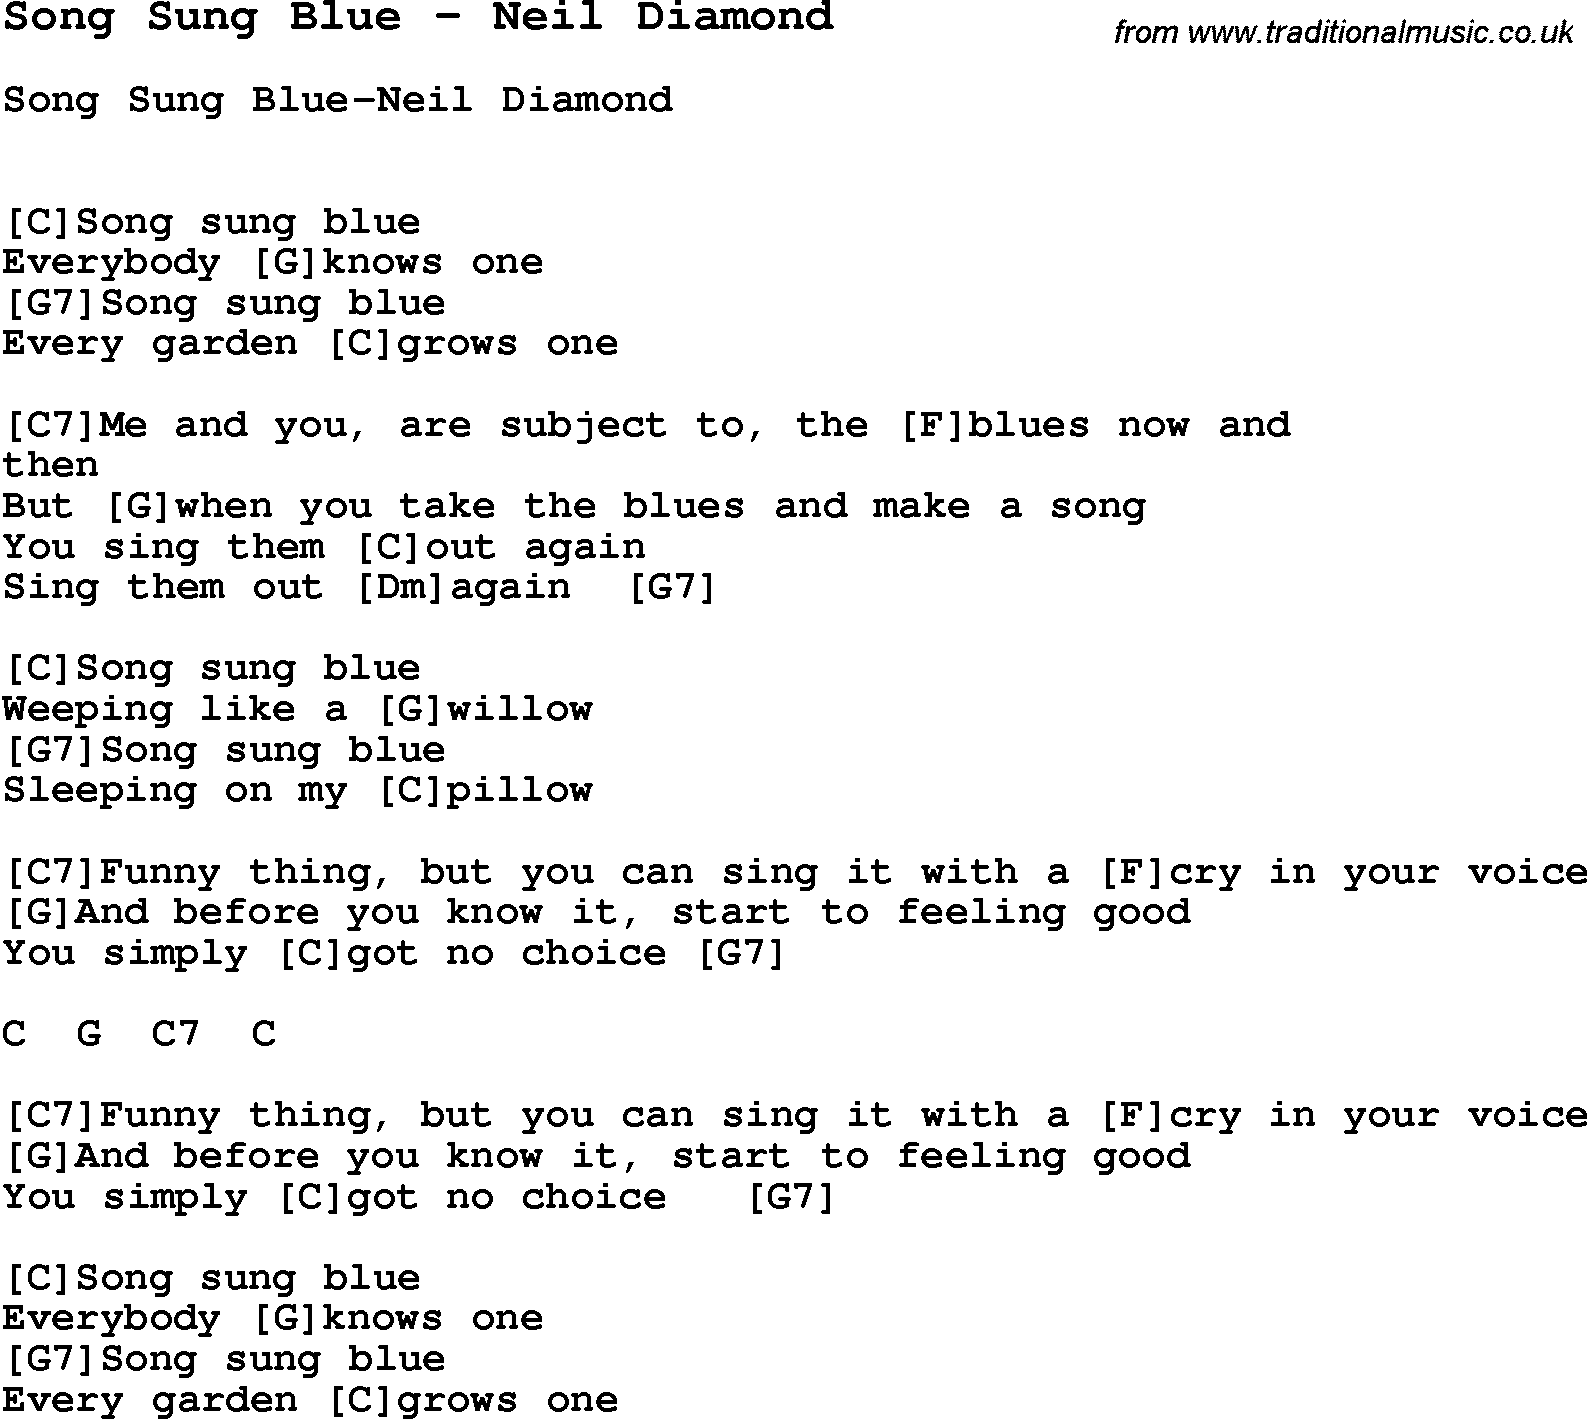 Song Song Sung Blue by Neil Diamond, with lyrics for vocal performance and accompaniment chords for Ukulele, Guitar Banjo etc.